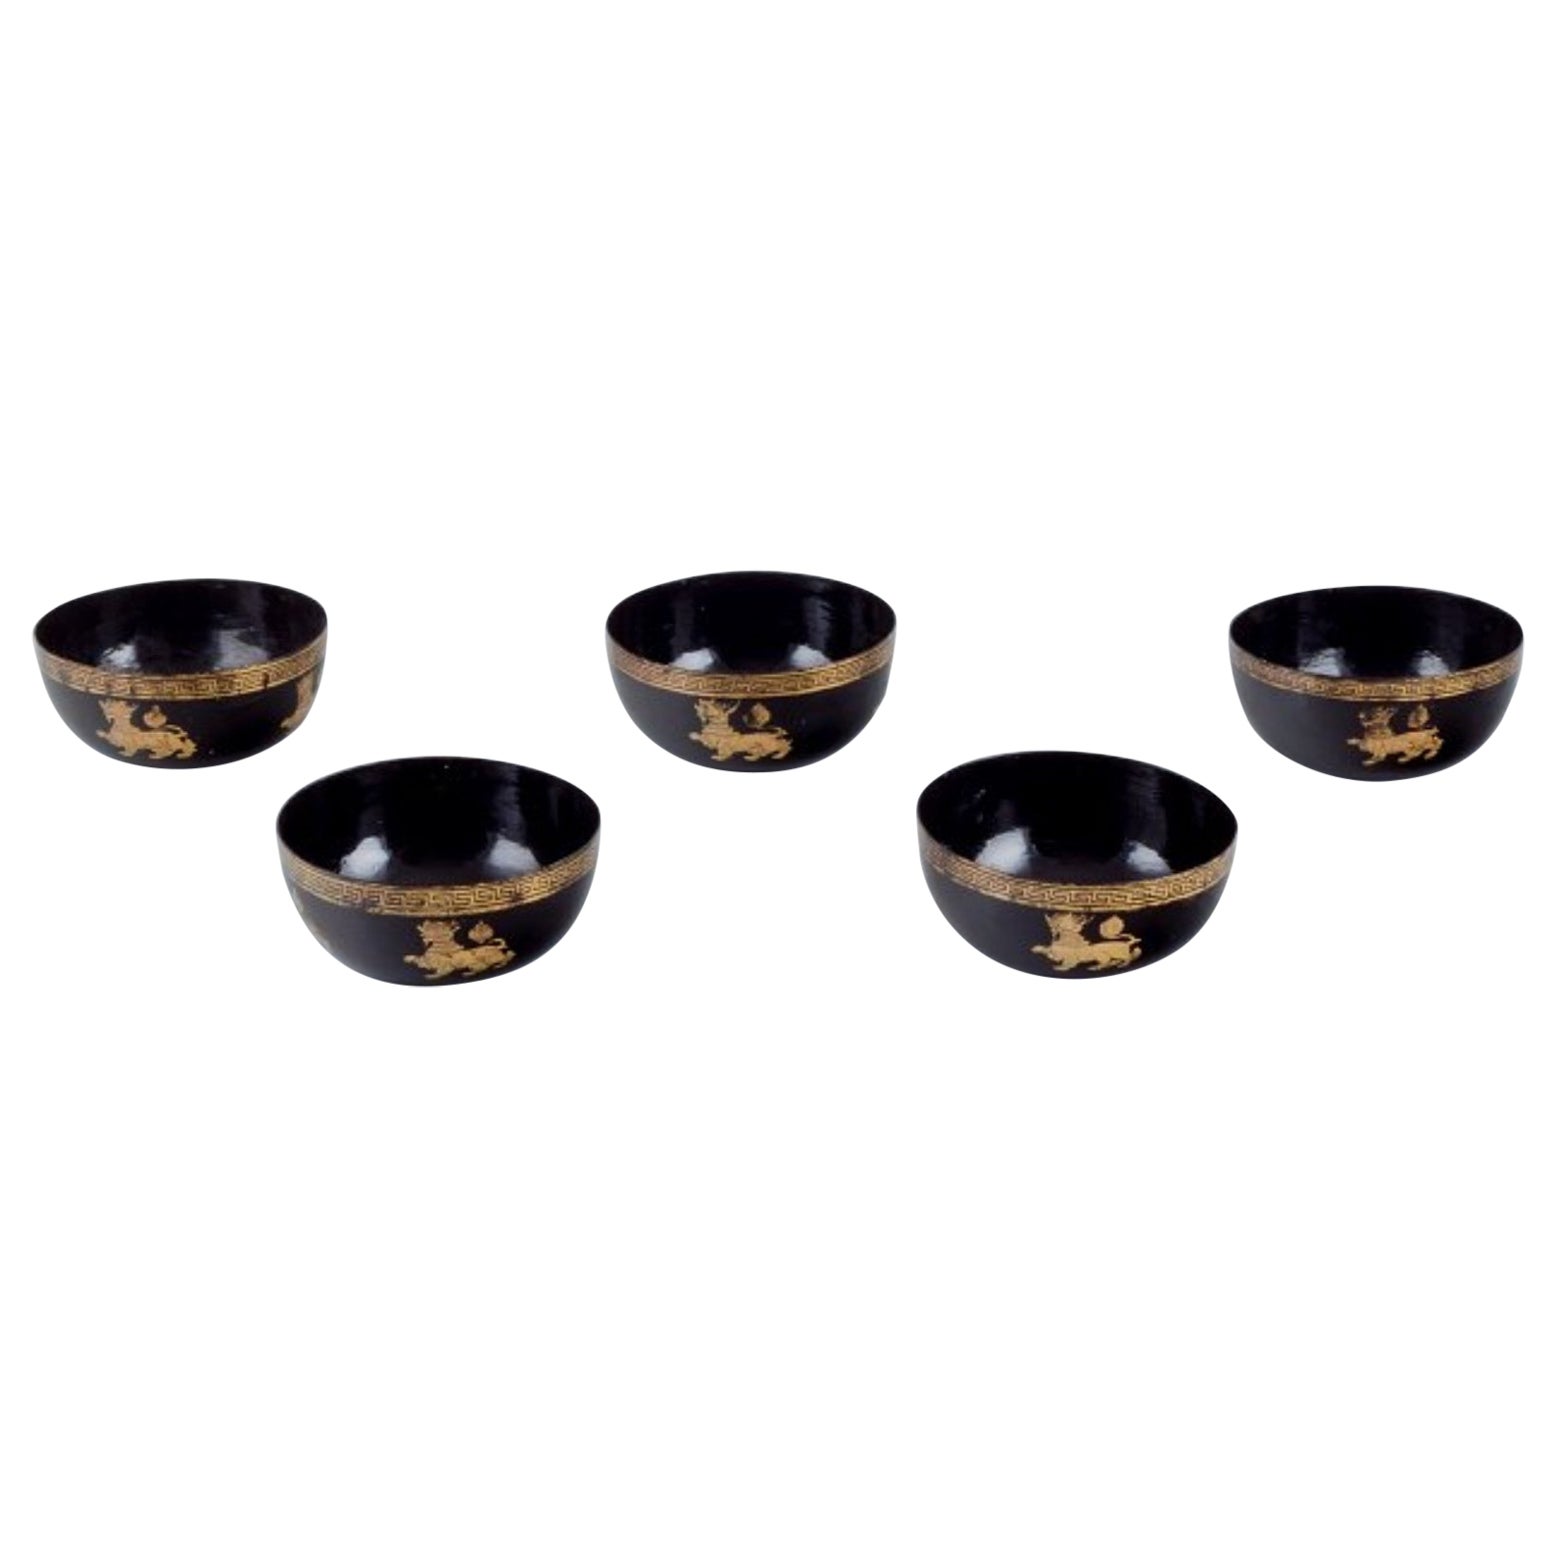 Five Asian bowls made of papier-mâché. Decorated in gold and black. For Sale